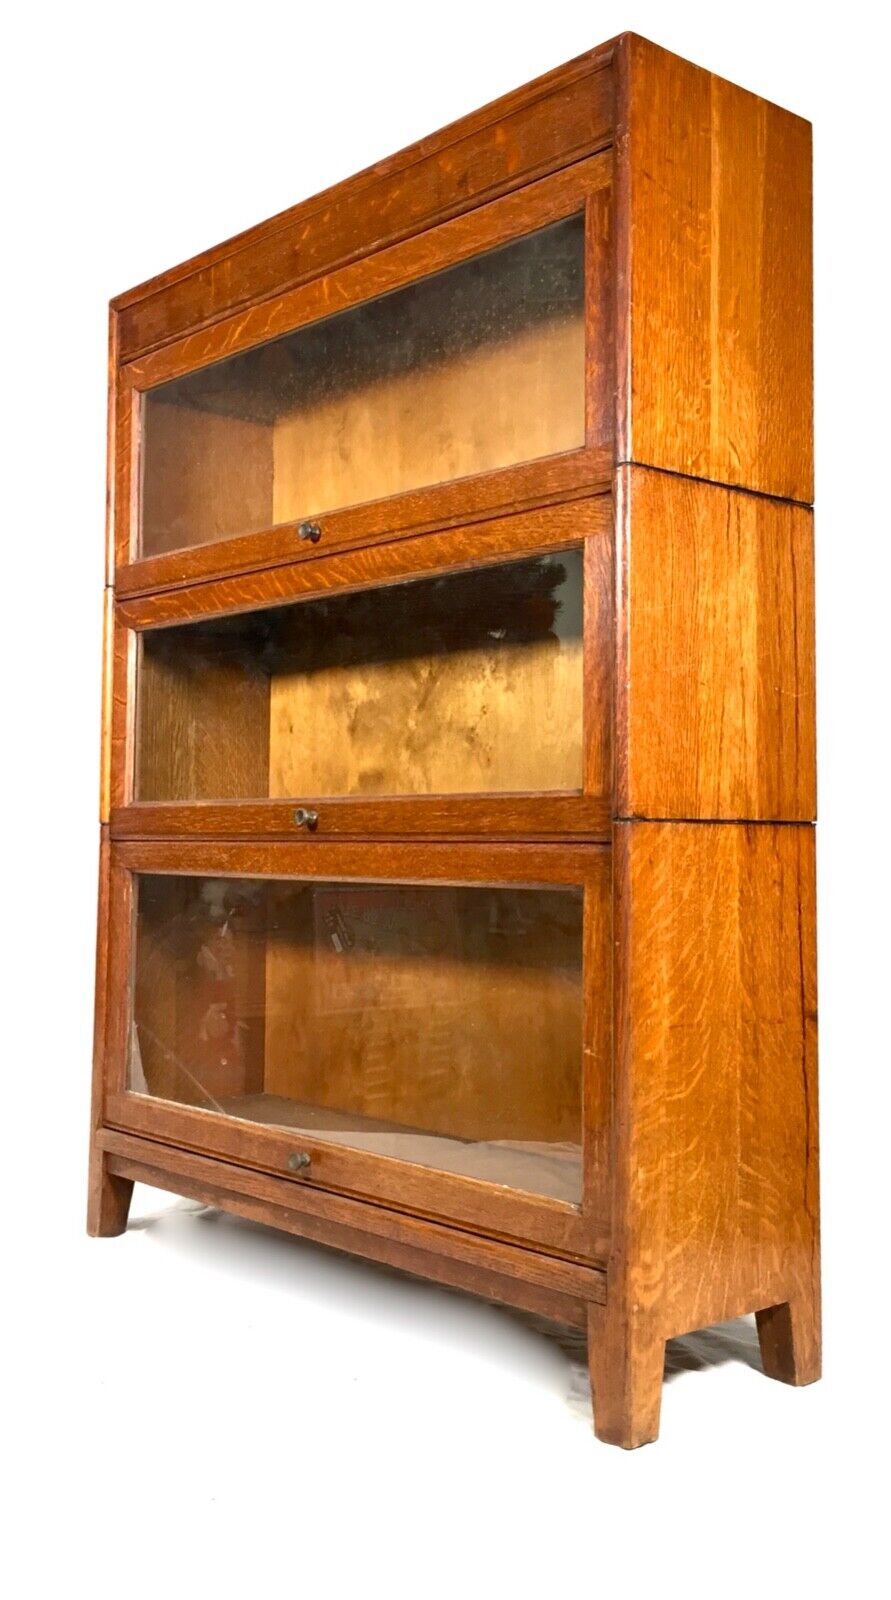 Antique Glazed Oak Sectional Barristers Bookcase by Gunn / Display Cabinet